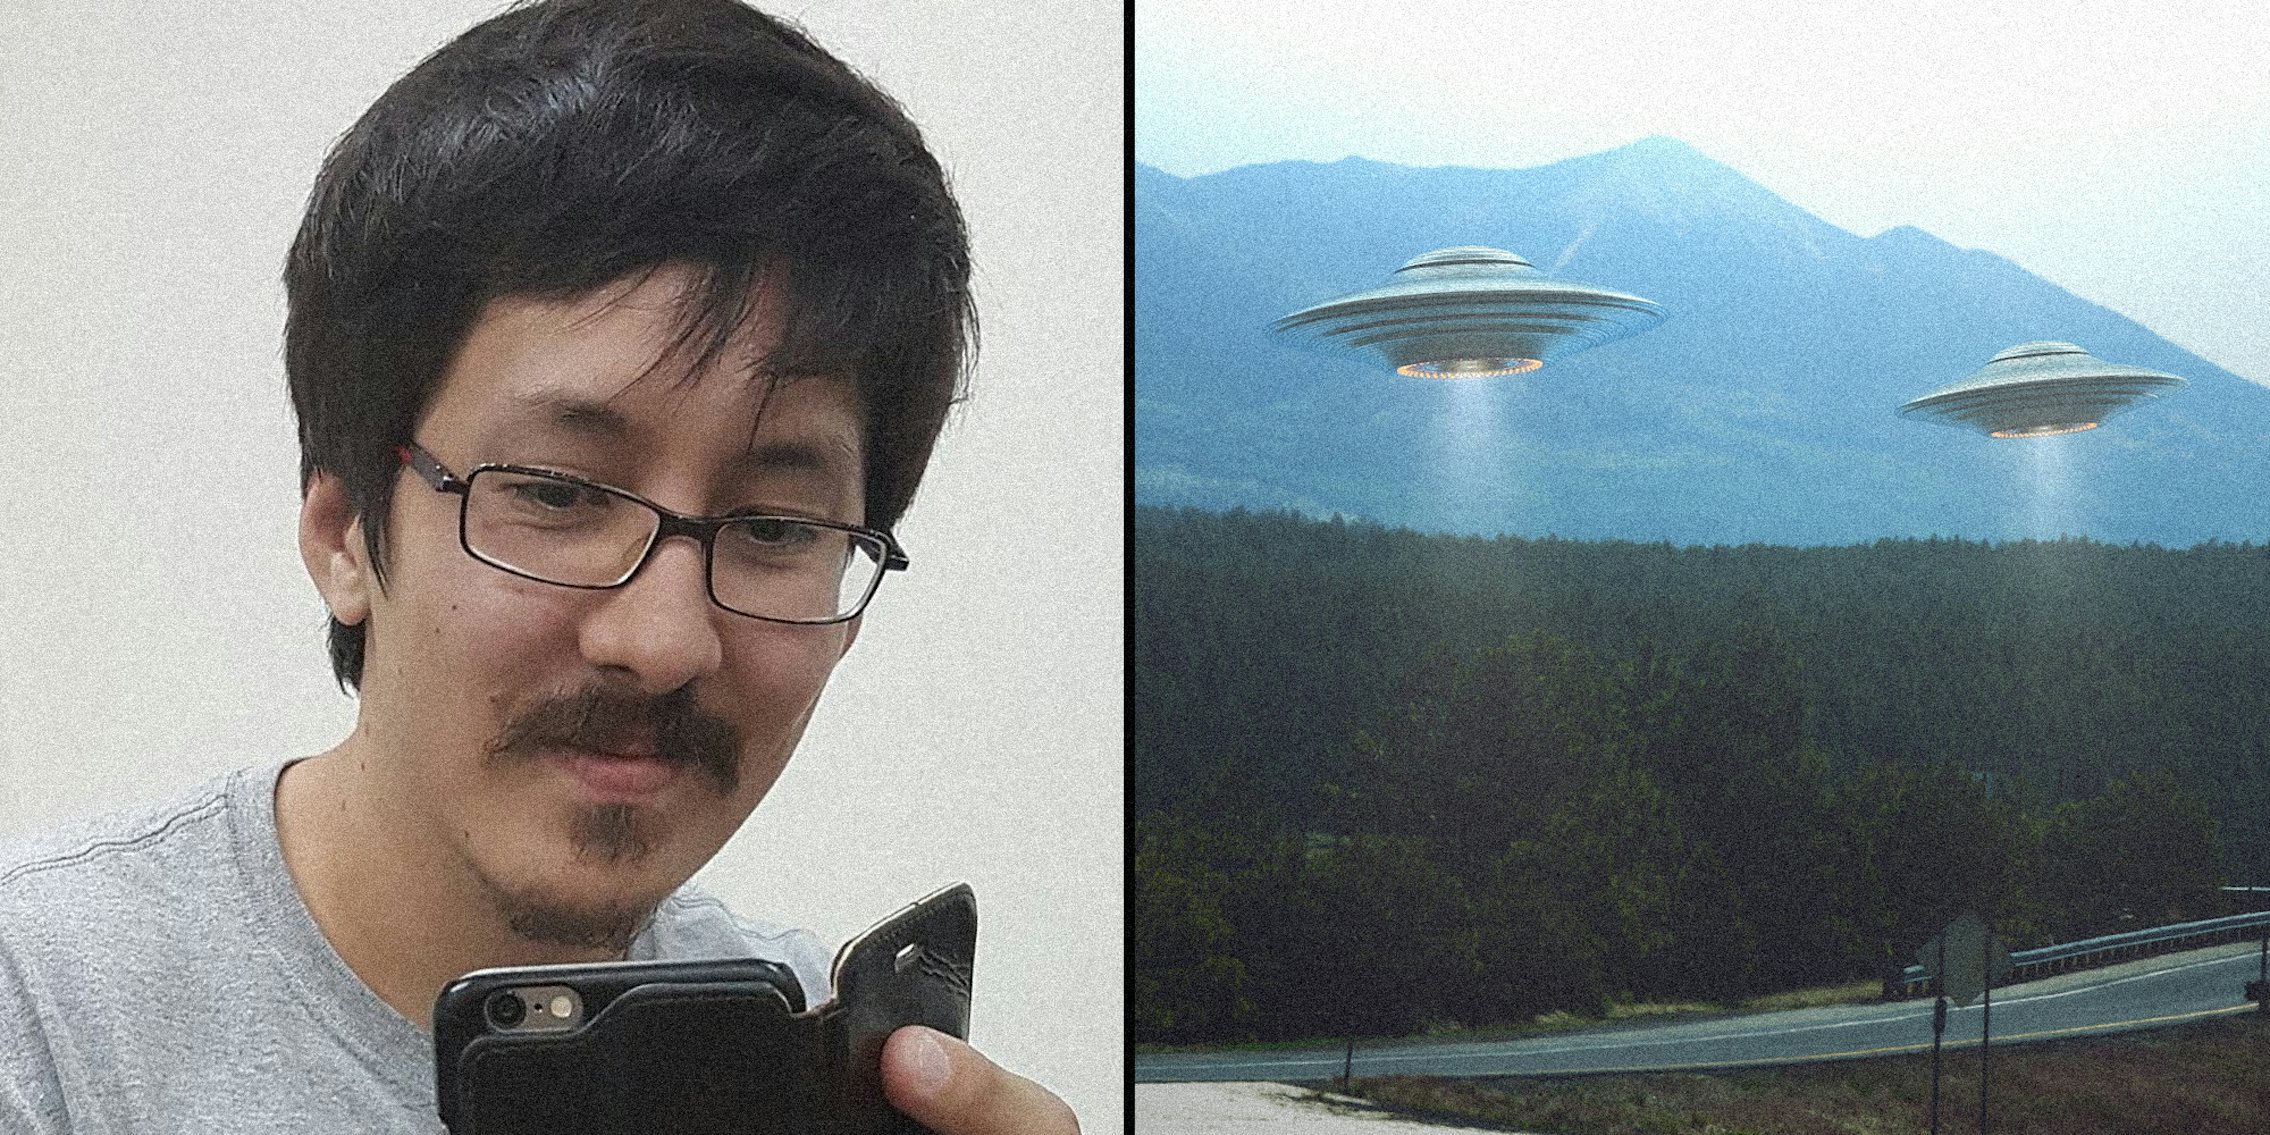 A man (L) and fake UFOs (R).